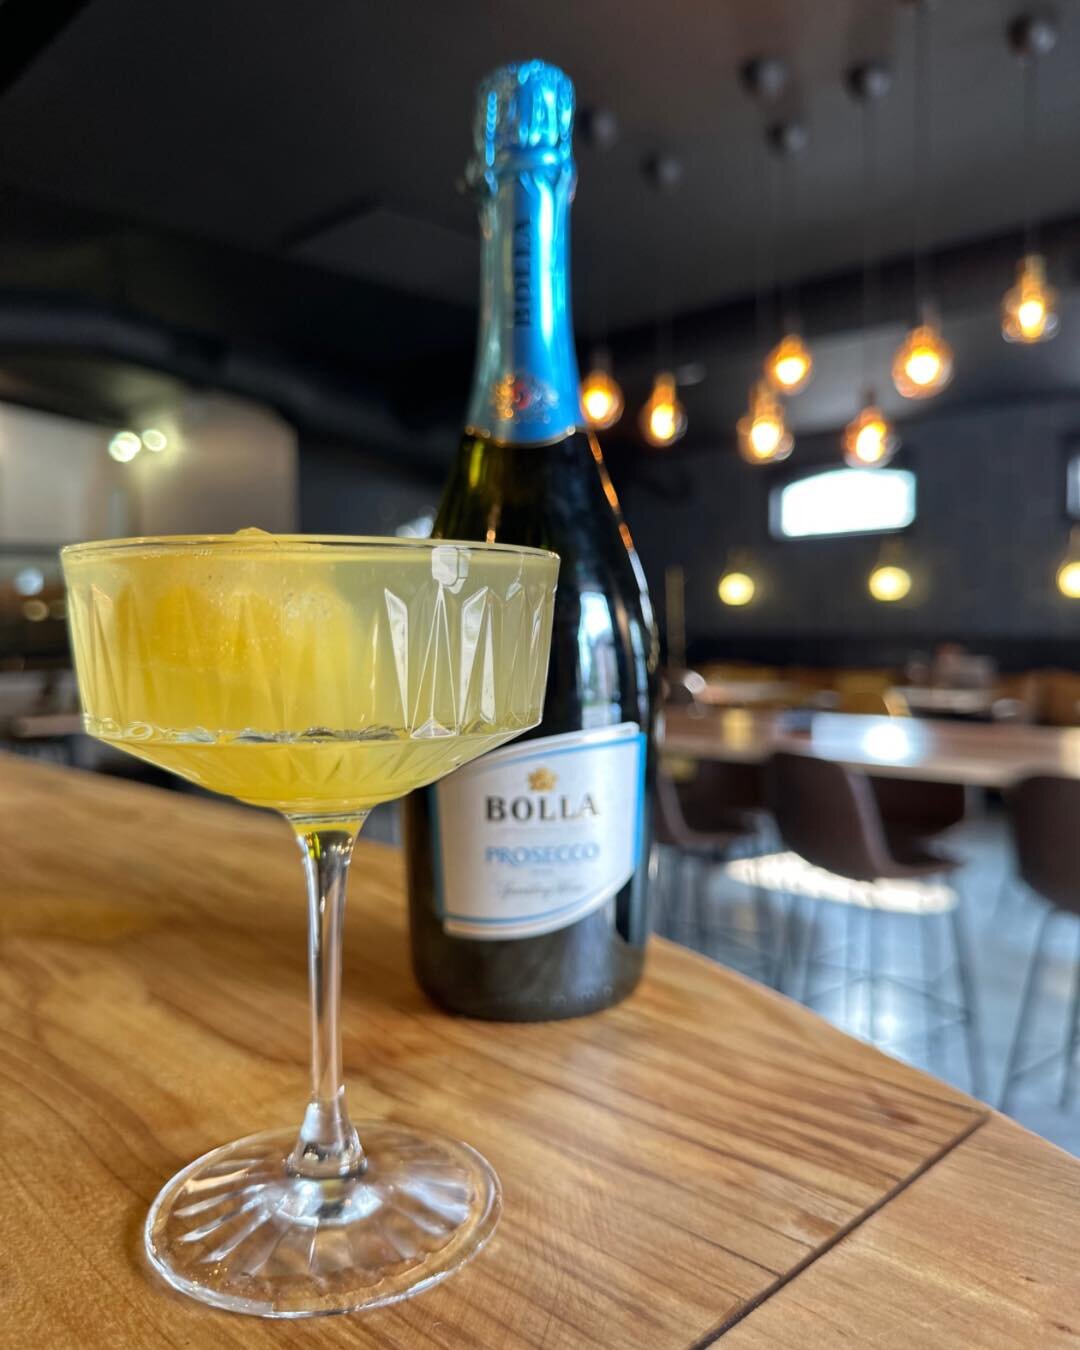 We have an exciting Mimosa this weekend, just in time for #MothersDay! Prosecco with an orange or grapefruit juice rose cube! Available all weekend long. Grab one for yourself or have them with a loved one! 

#SipShareConnect